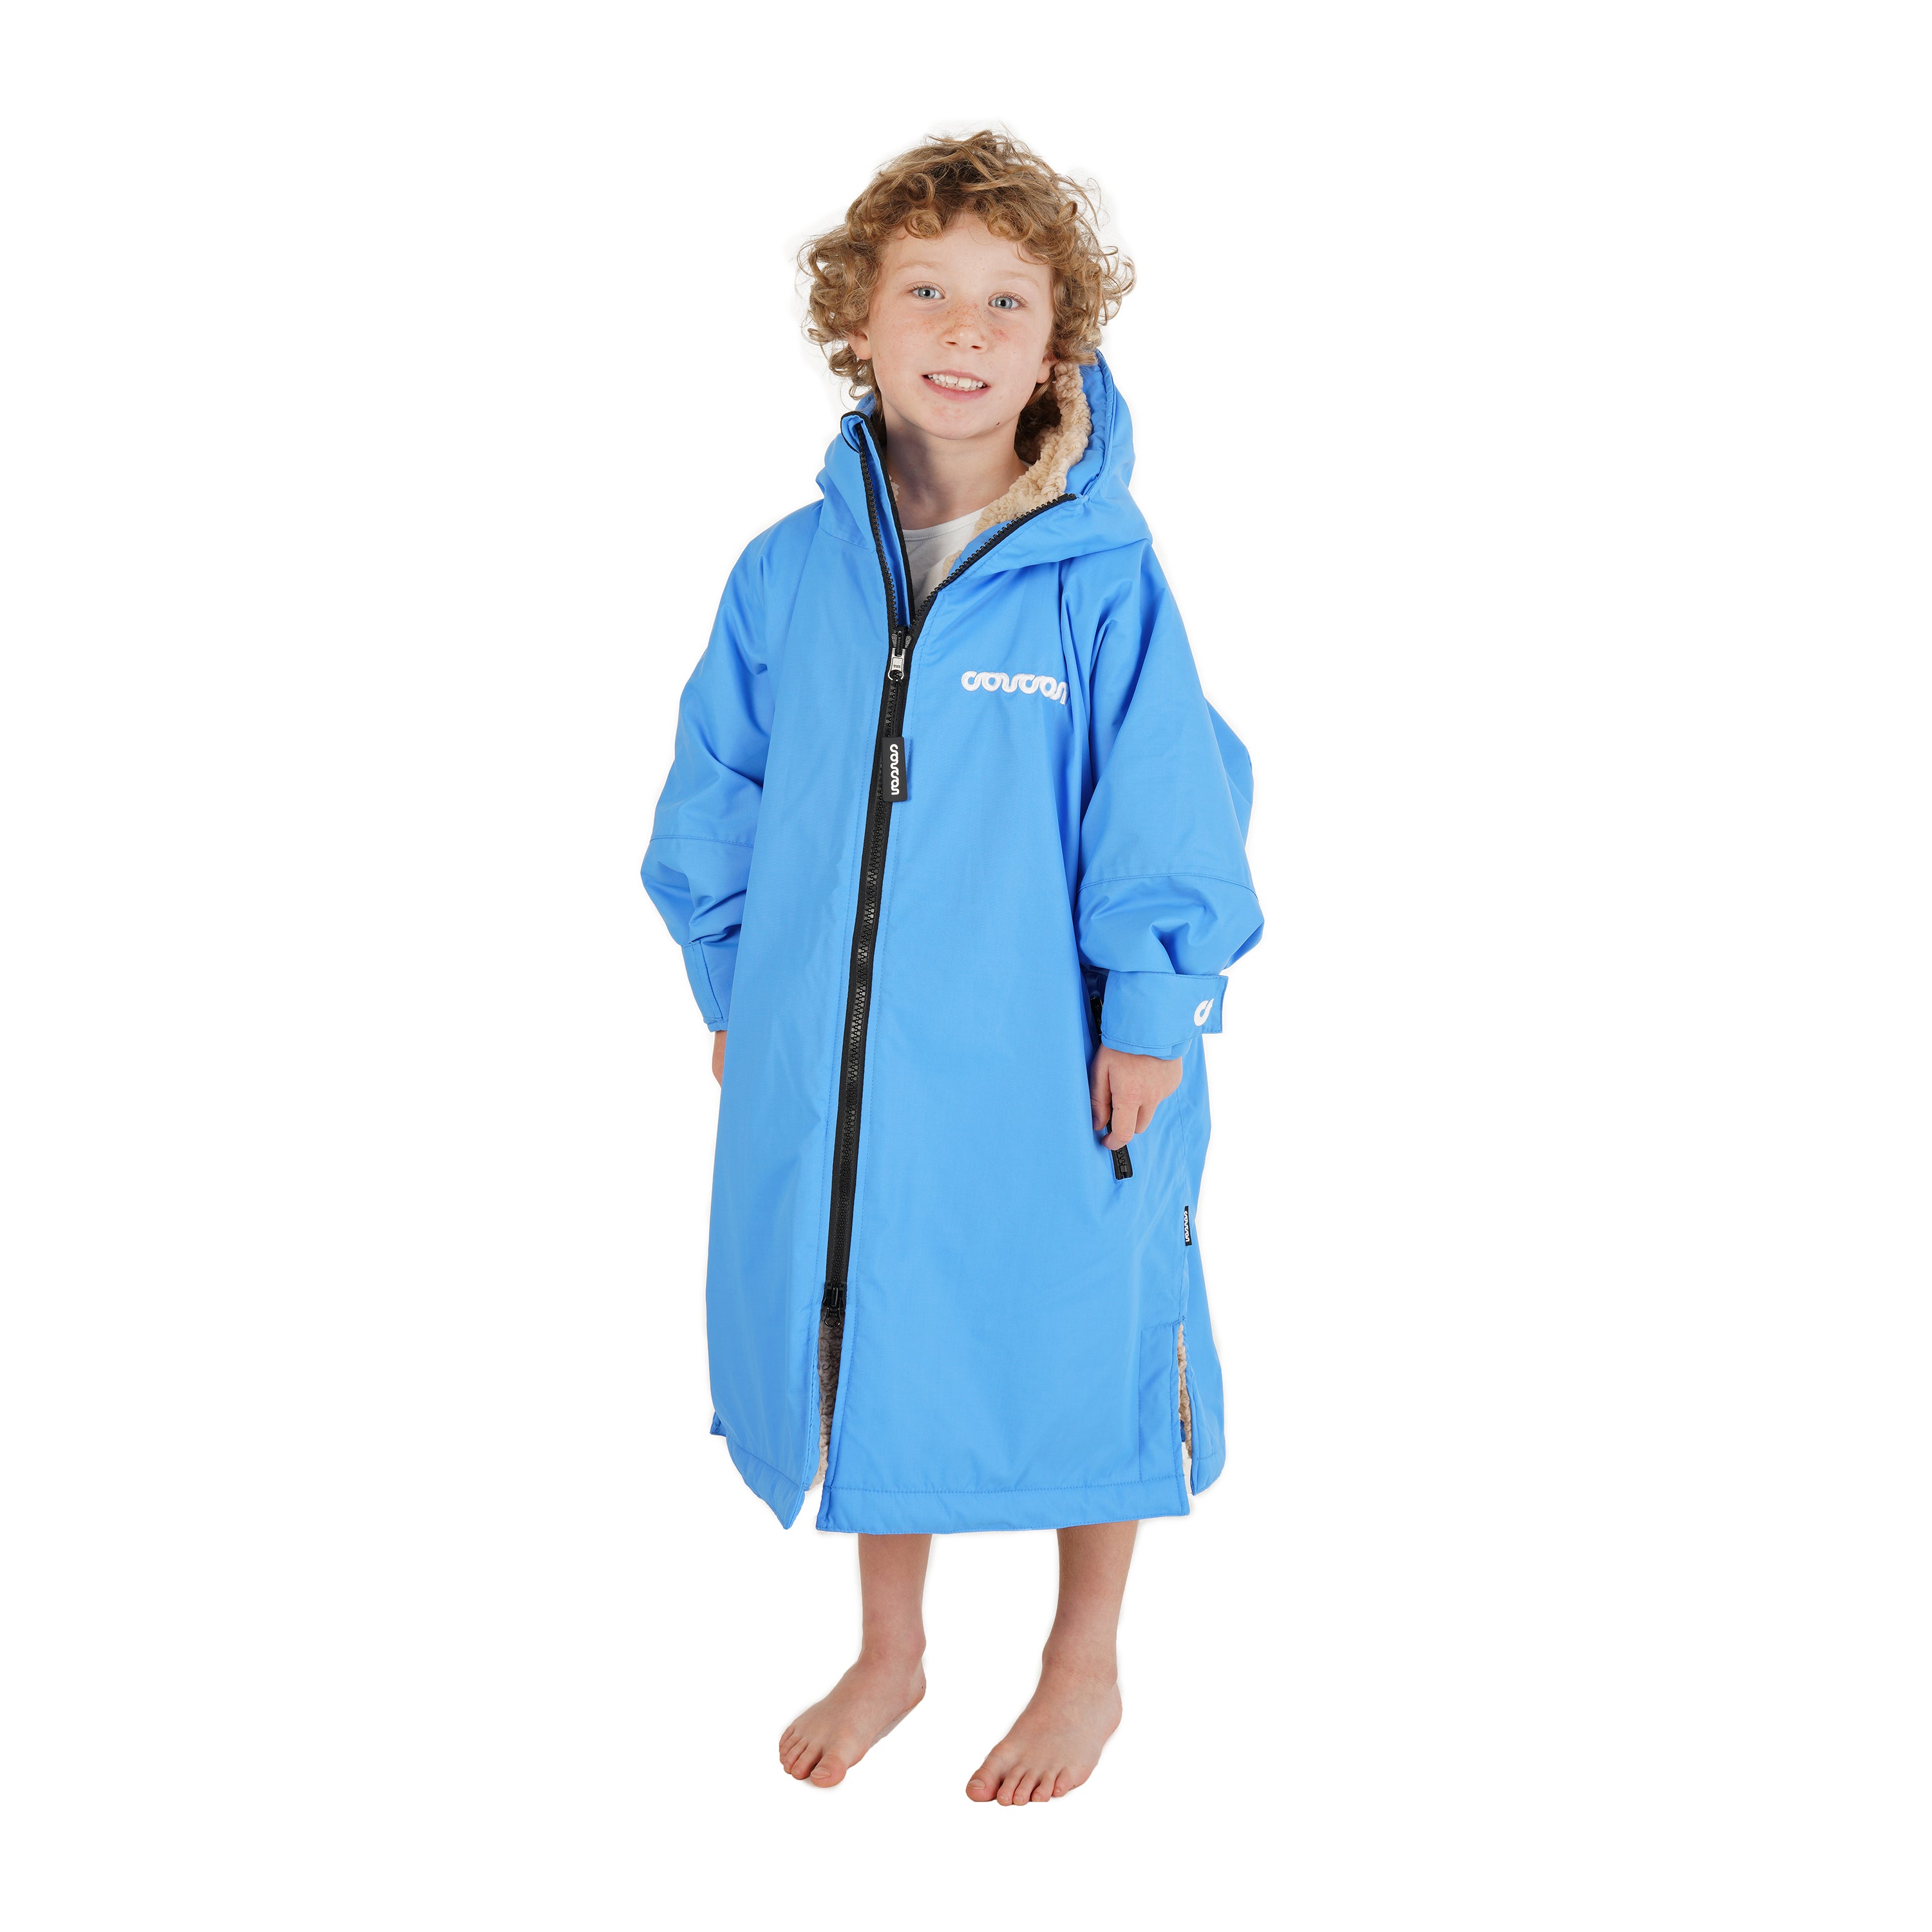 Kids Long Sleeve Changing Robe, Electric Blue, 5 - 9 YRS